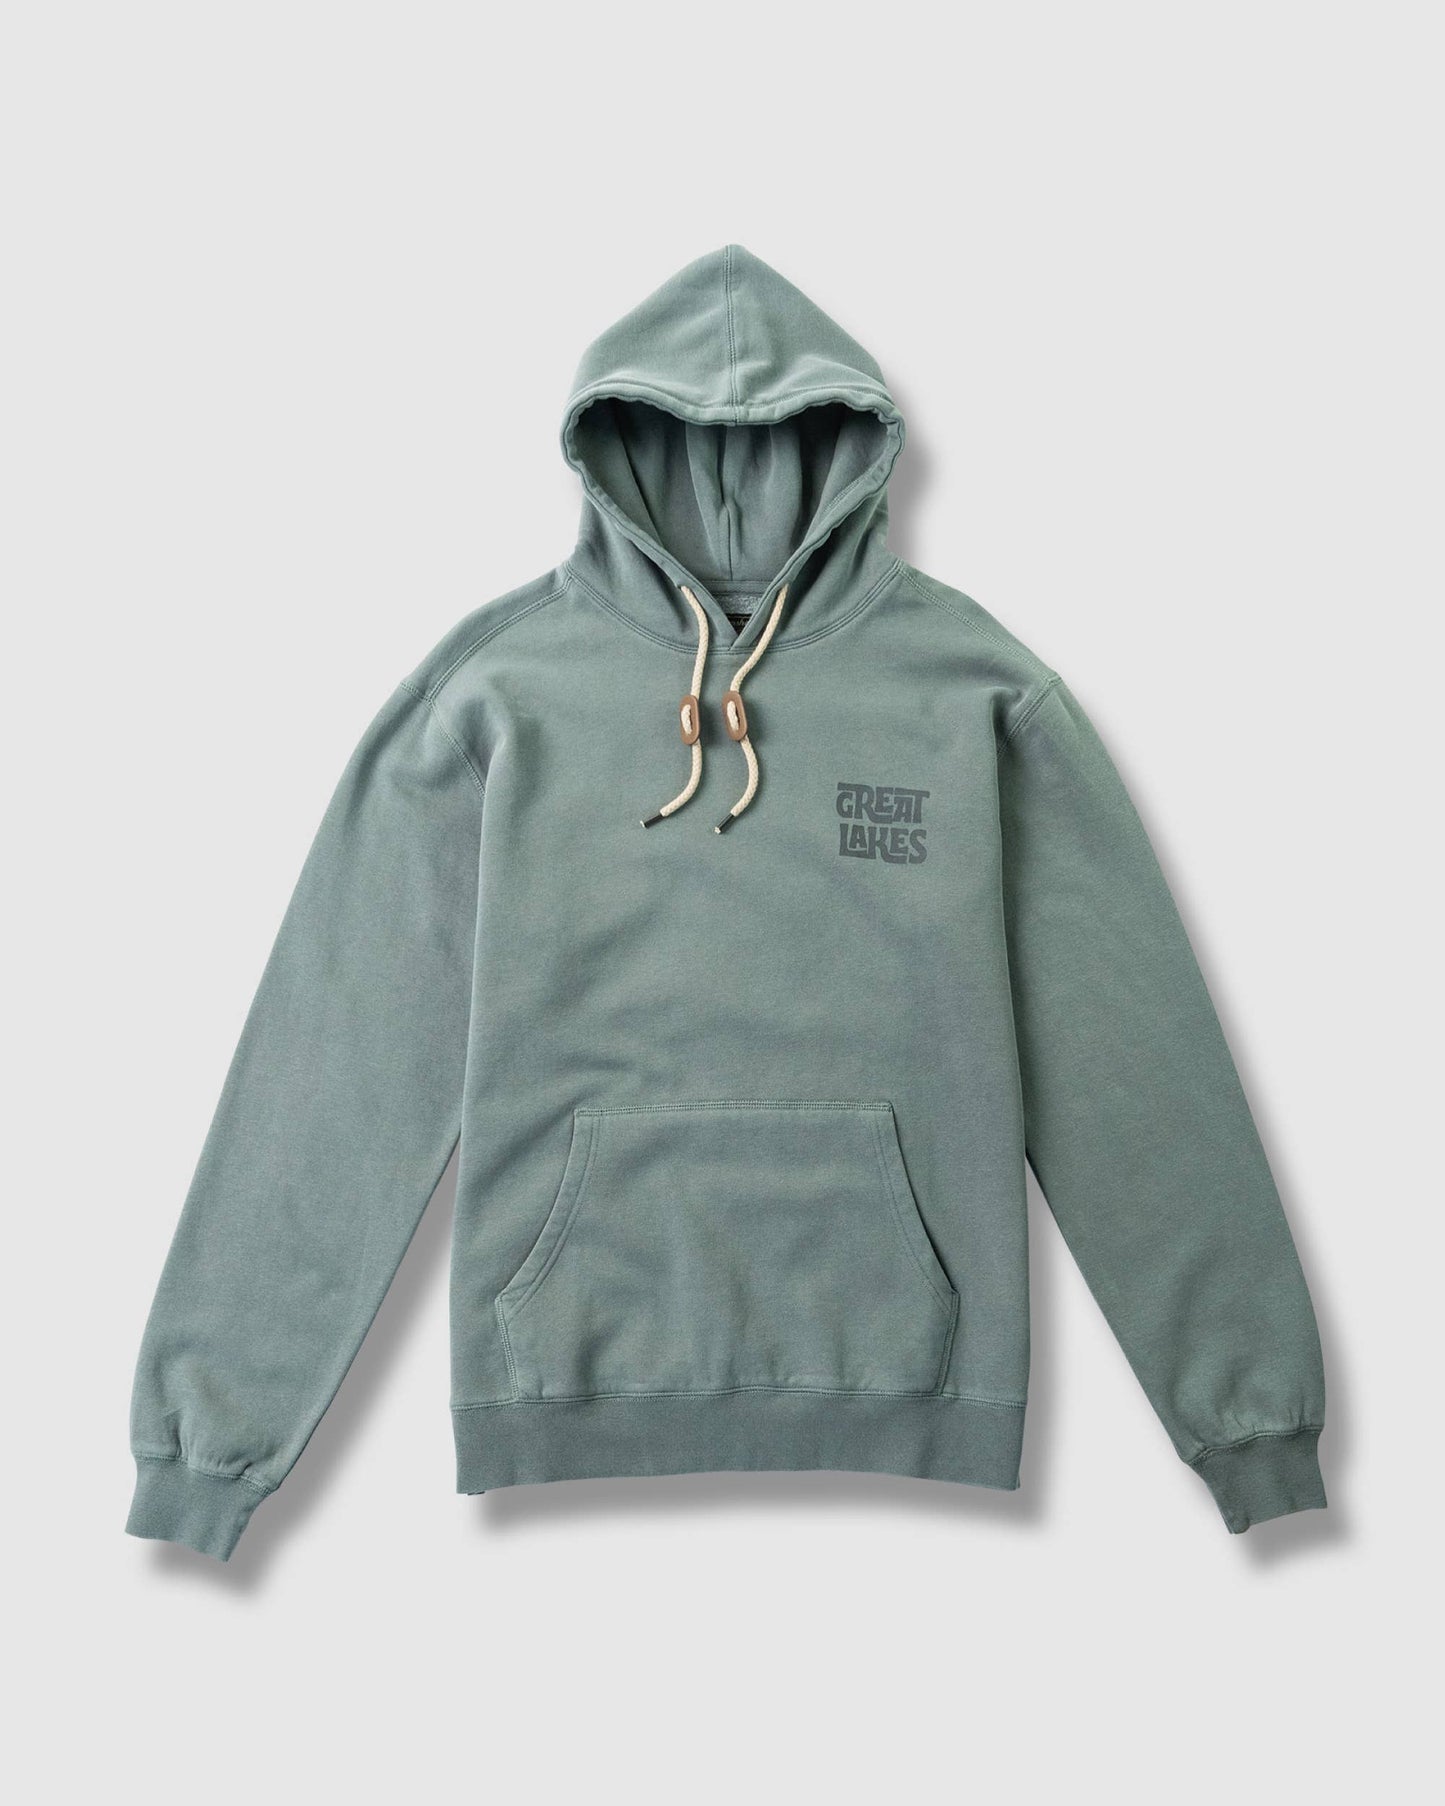 Solstice Hoodie - Storm and Sky Shoppe - Great Lakes